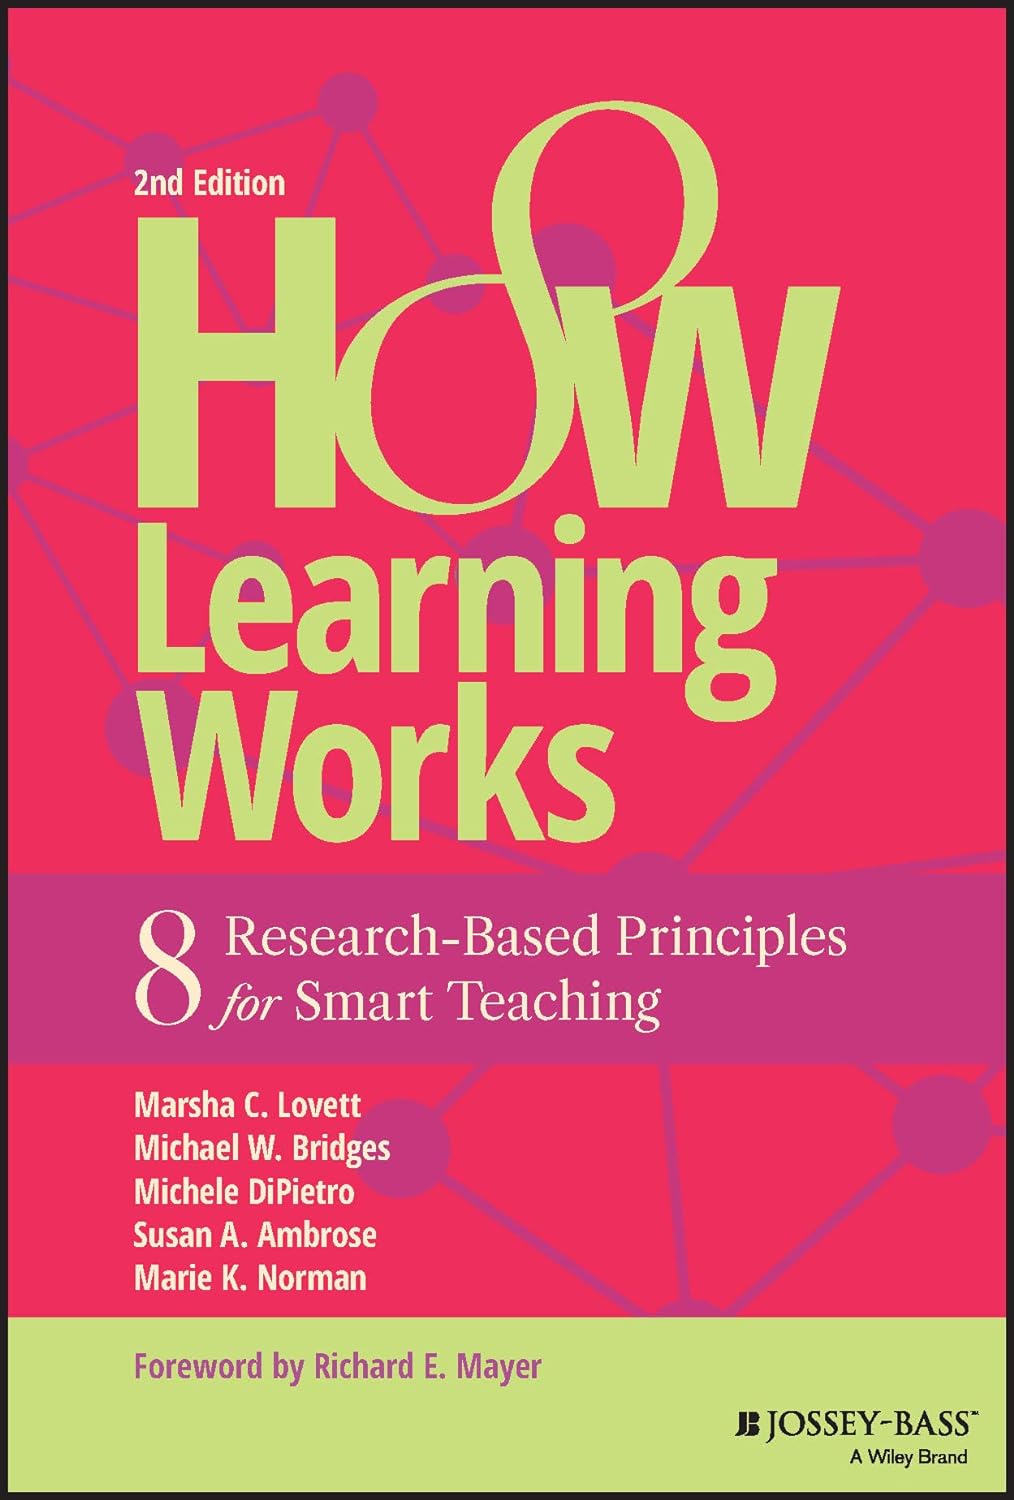 cover art for the book how teaching works.